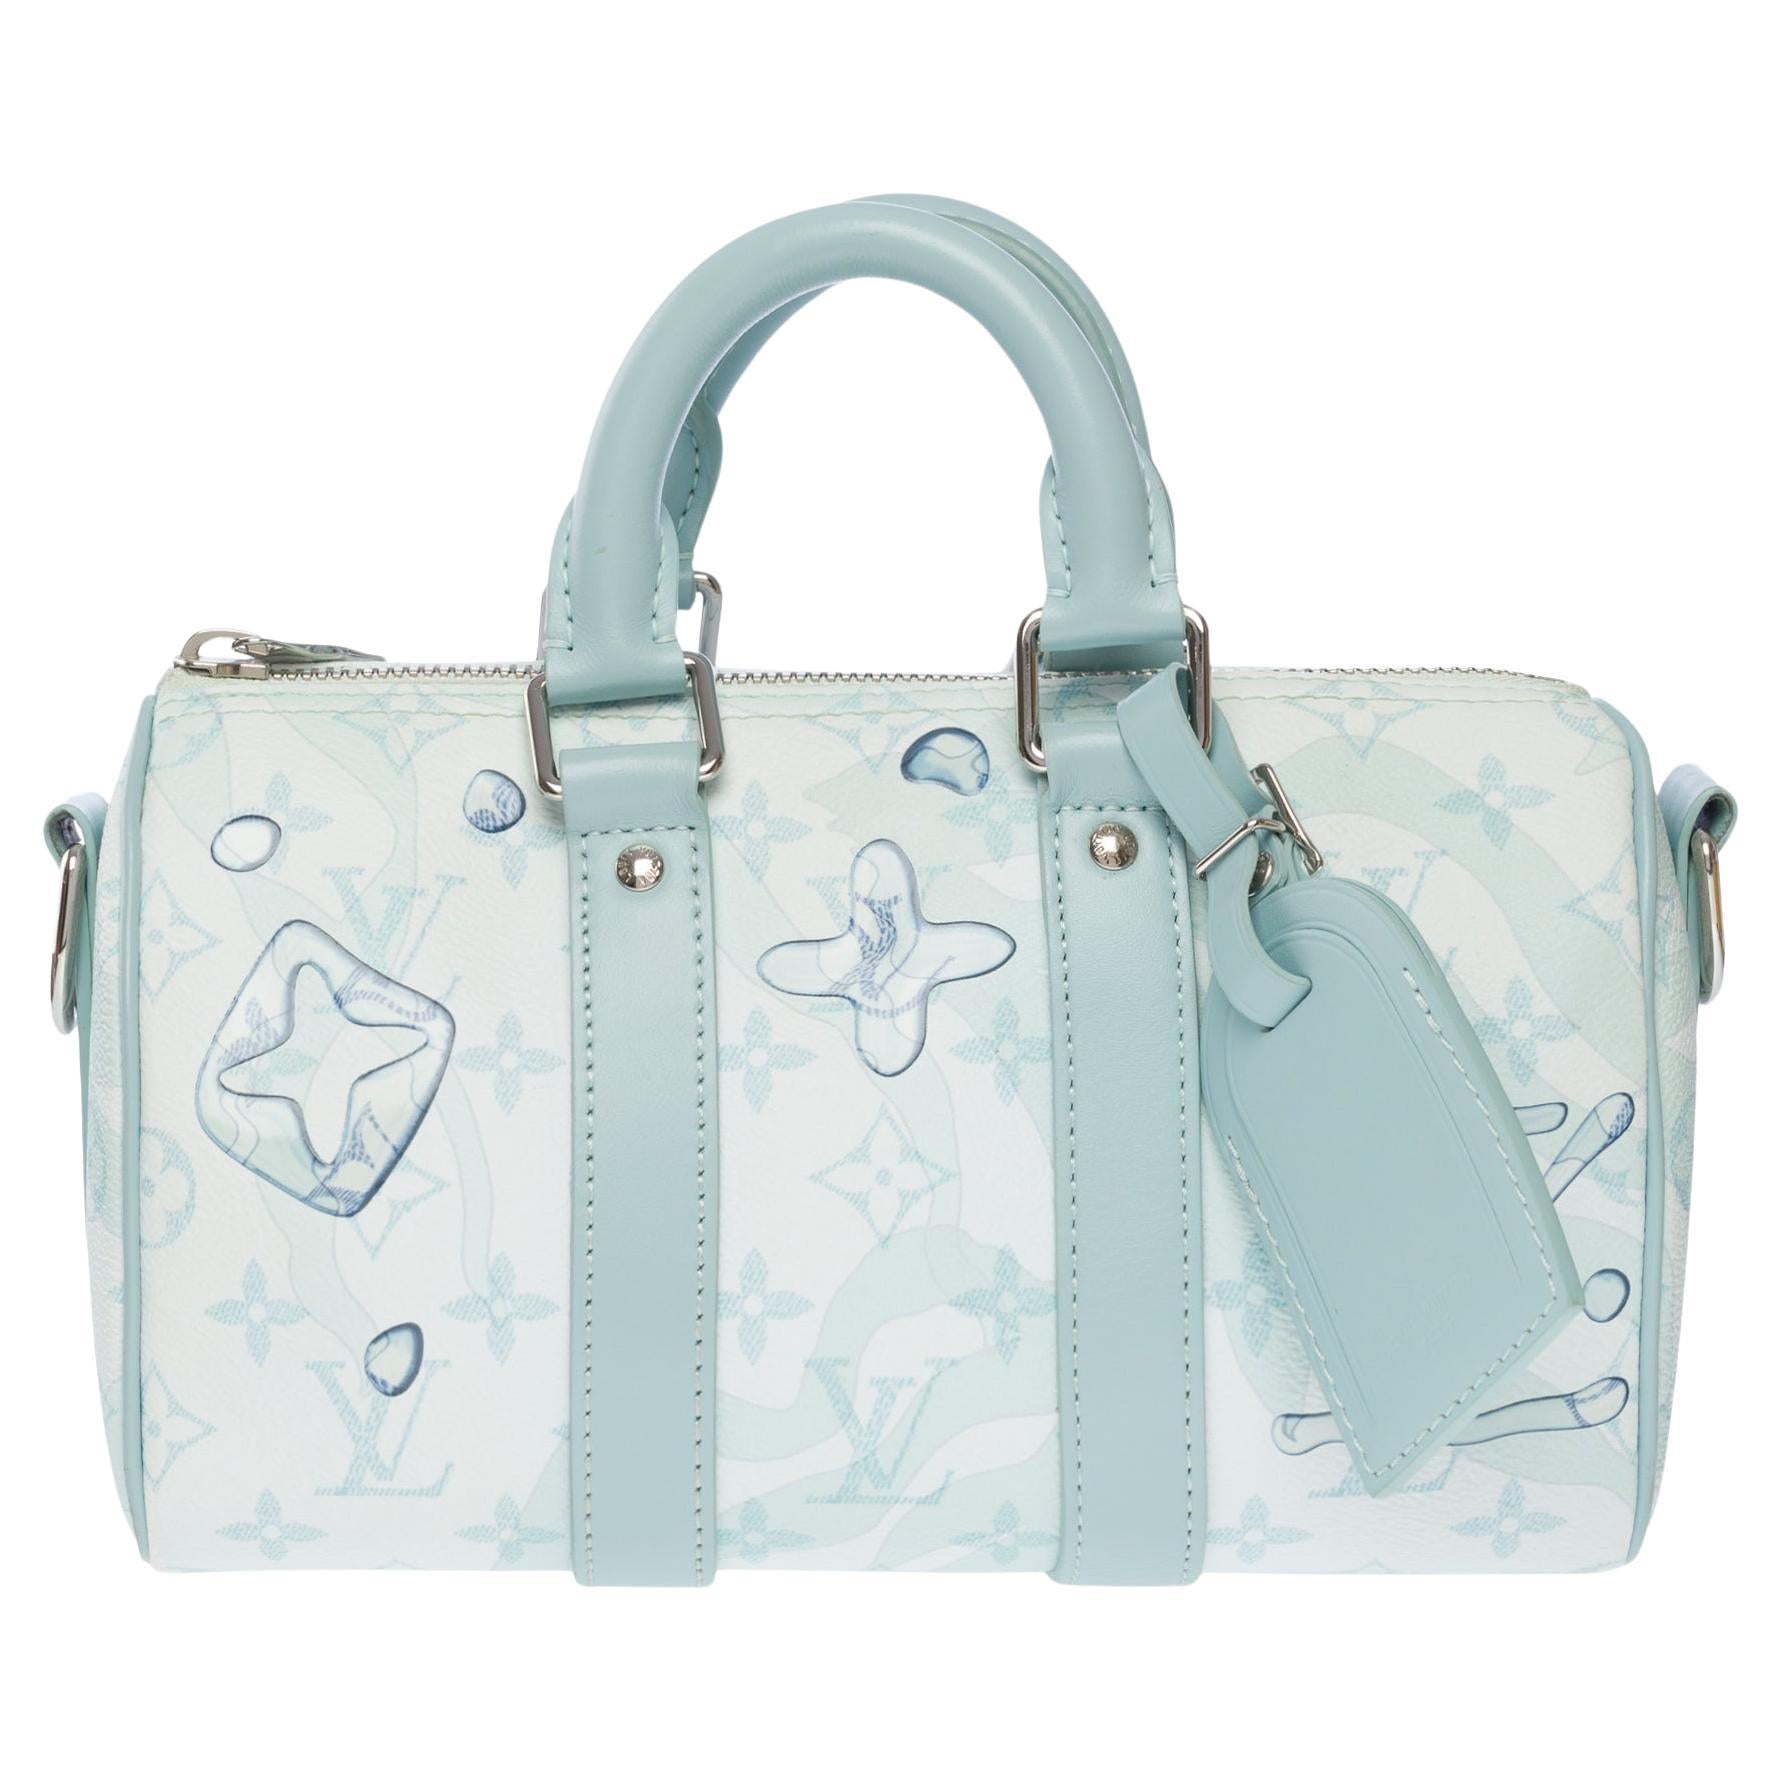 The Keepall Bandoulière 25 is fashioned from Monogram Aquagarden canvas, in which the LVs and Monogram Flowers appear to be covered by drops of water. The three-dimensional waterdrop effect is achieved with an innovative inkjet technique. This small